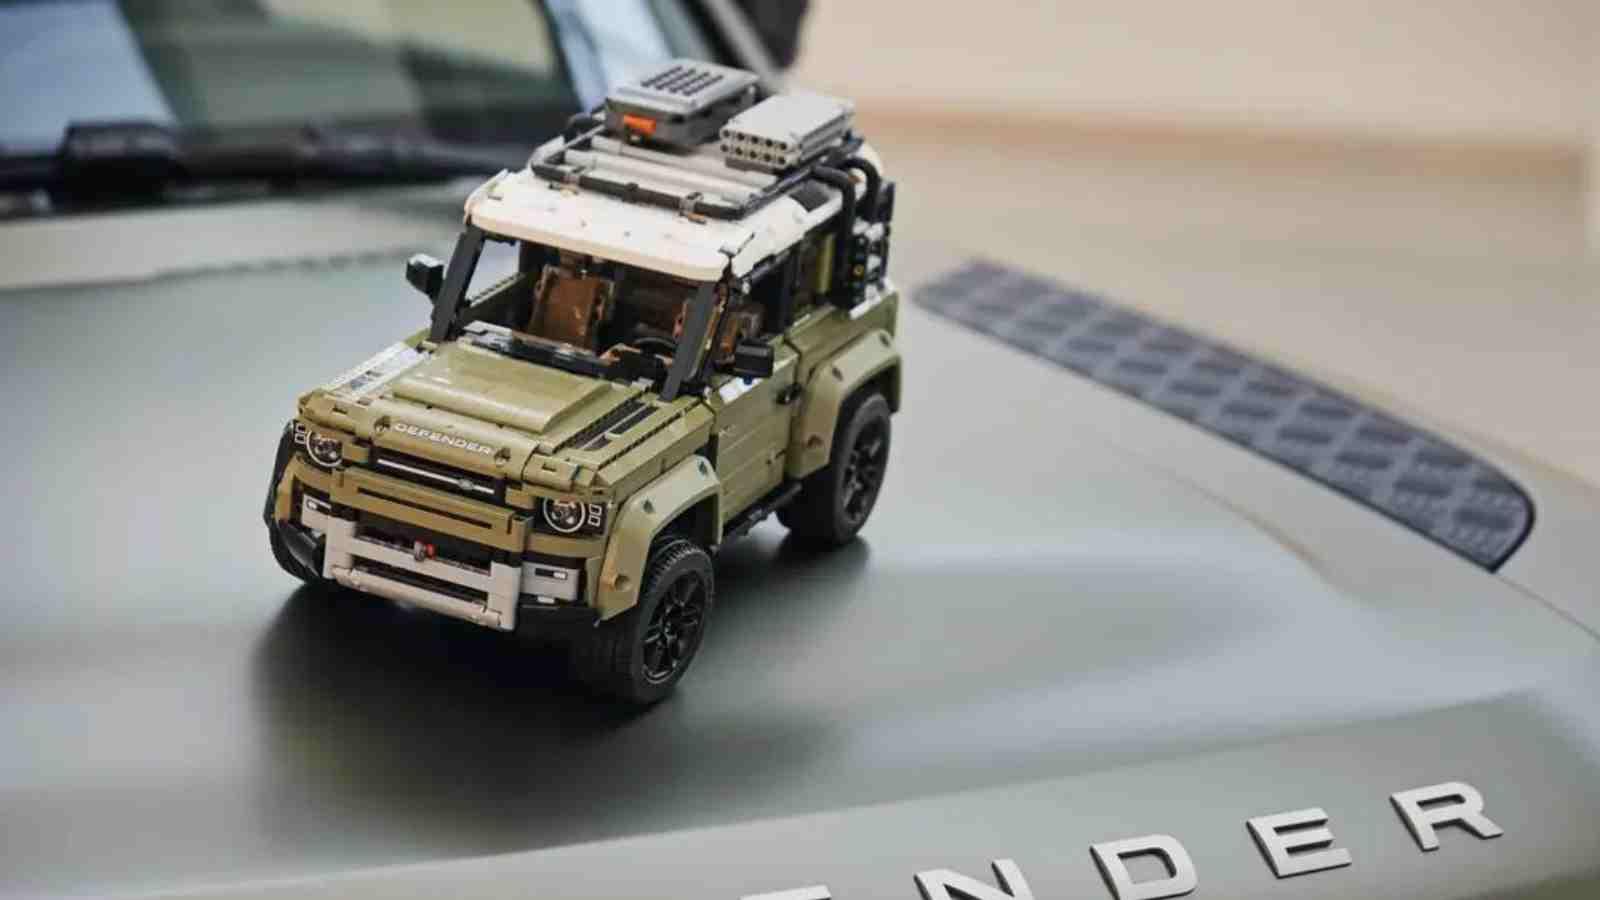 The LEGO Technic Land Rover Defender on the hood of the real-life Defender